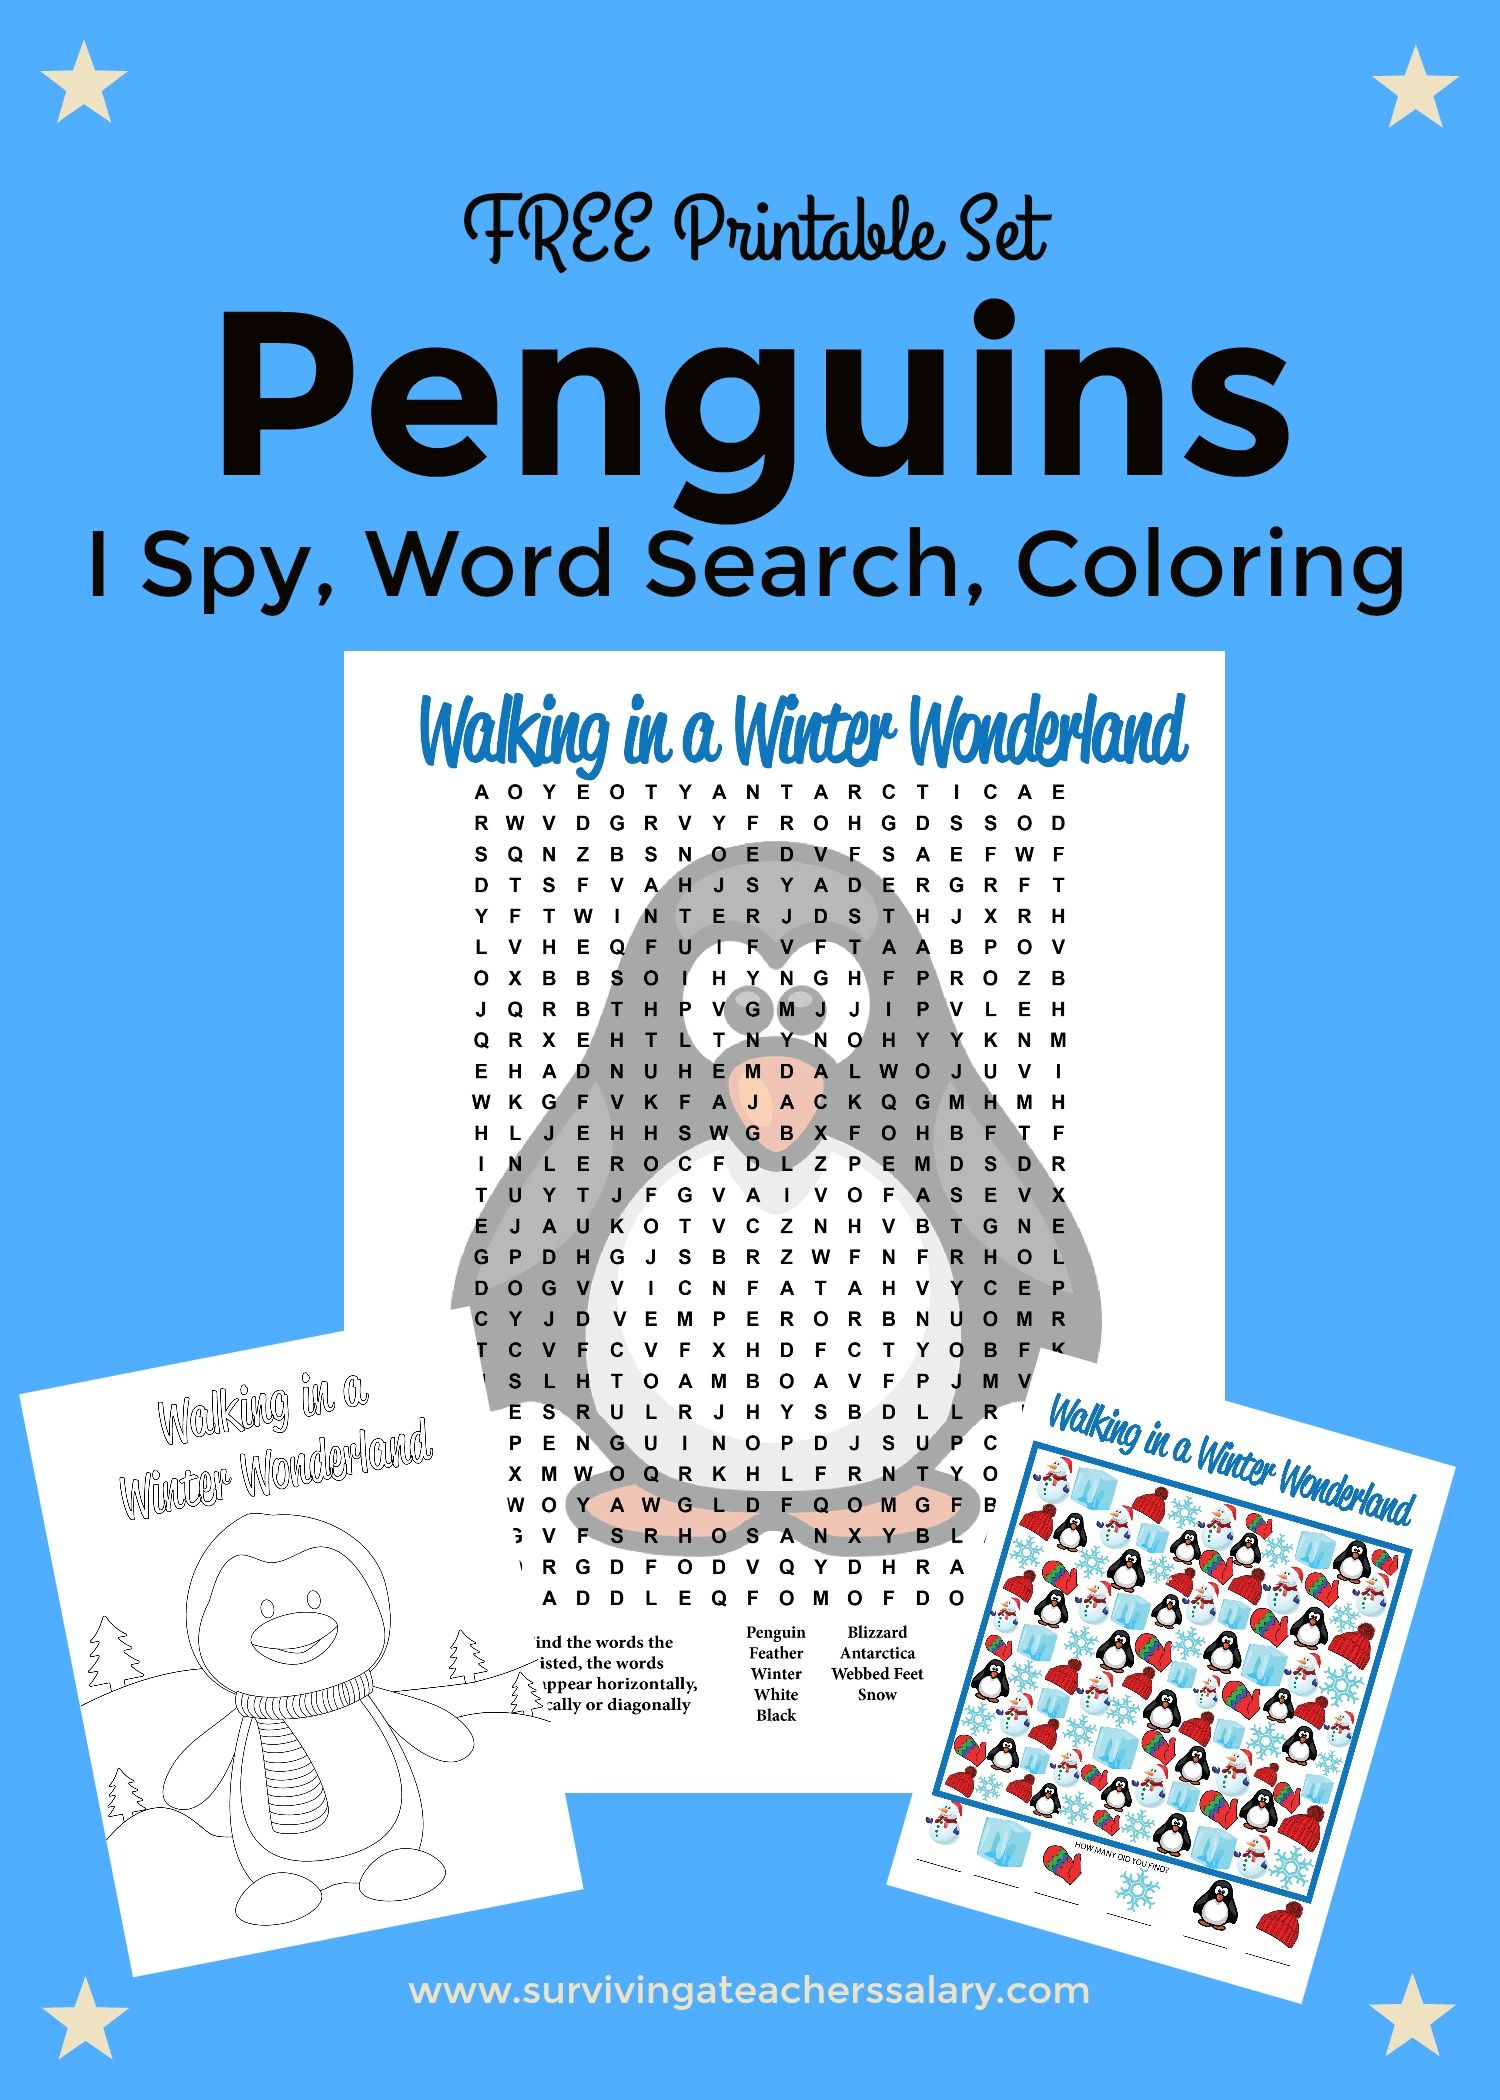 Free printable penguins worksheets coloring sheet word search i spy penguin activities penguin worksheets penguin classroom theme